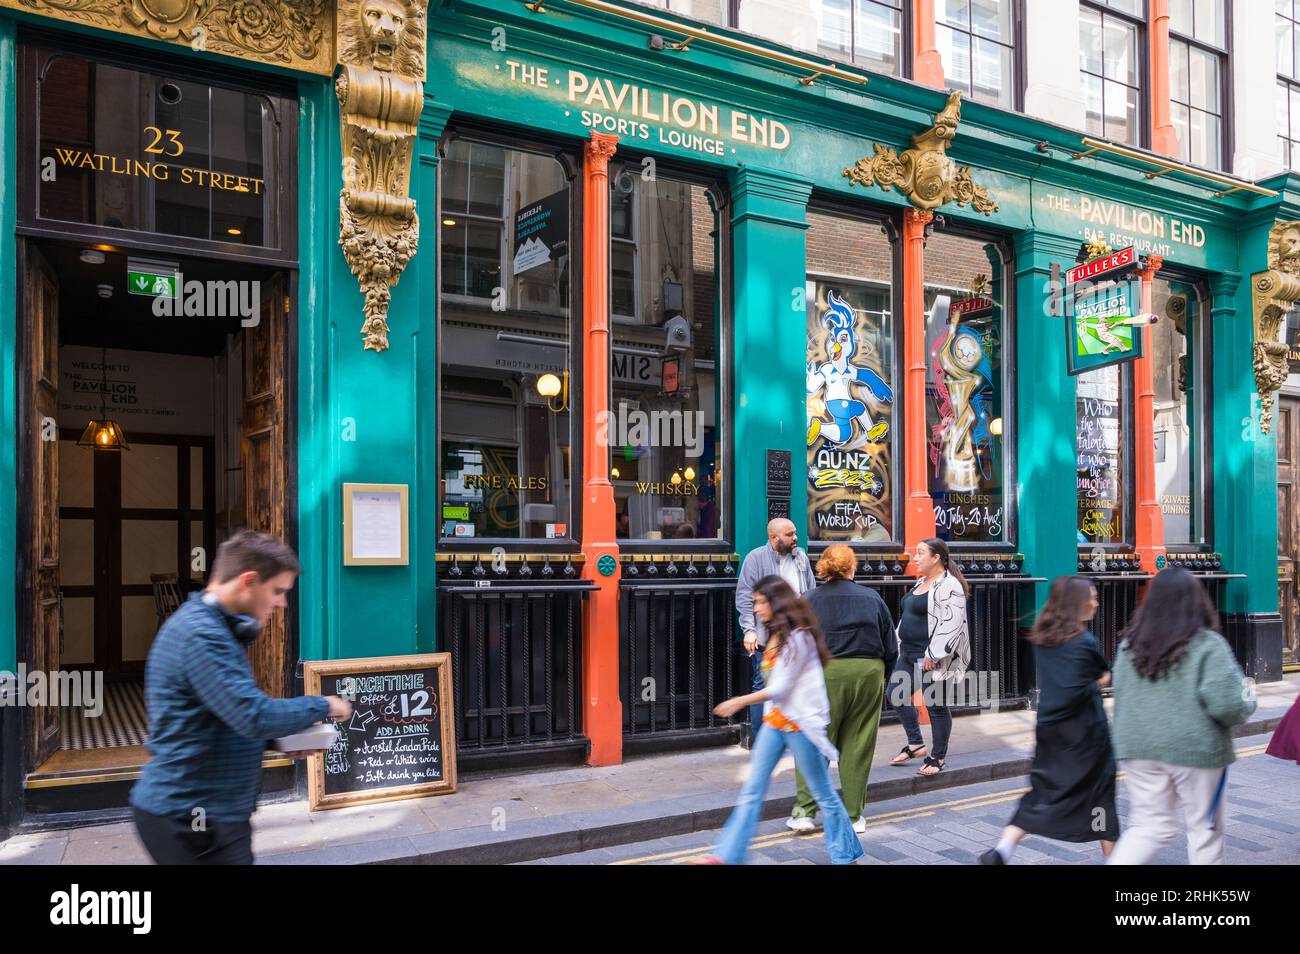 People stand in conversation and others pass by the colourful exterior of The Pavilion End, a Fuller's pub on Watling Street, City of London, England Stock Photo